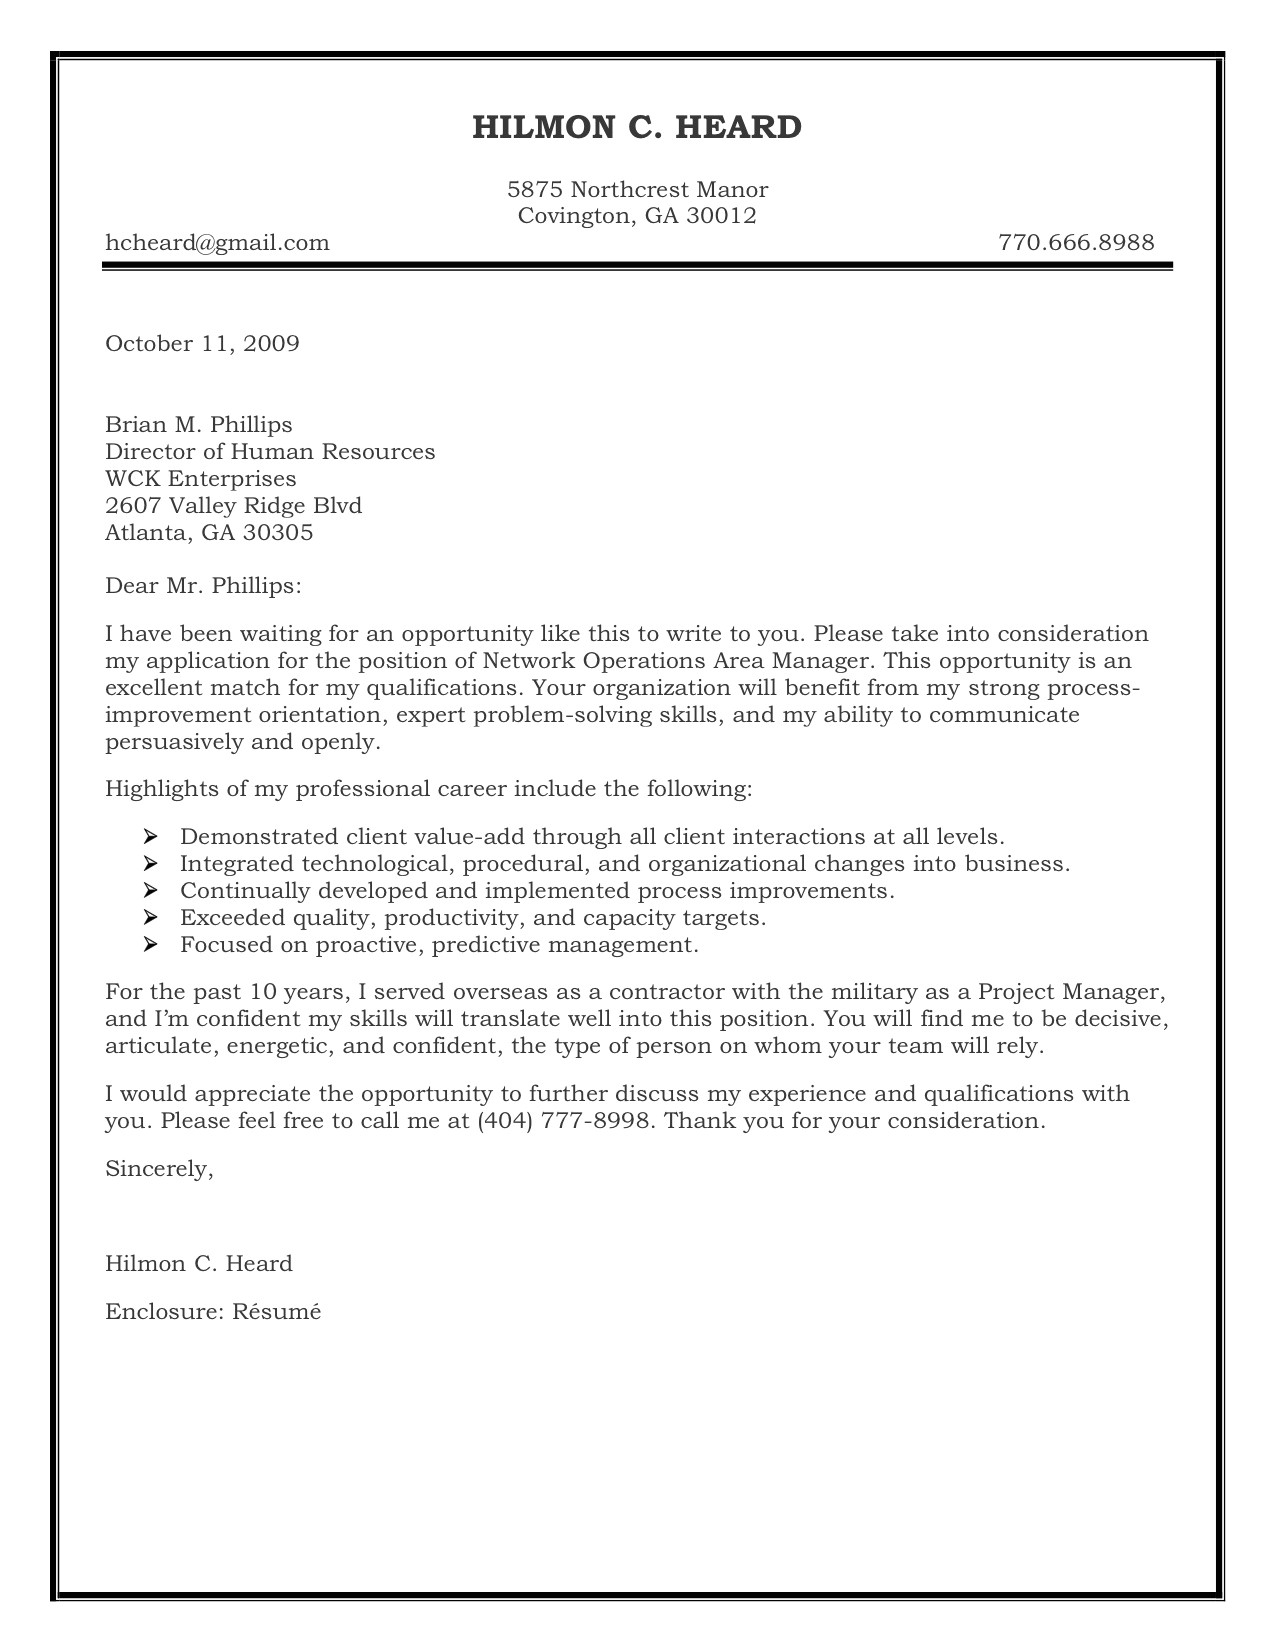 Cover Letter Examles Cover Letter Samples How to Make It Perfect